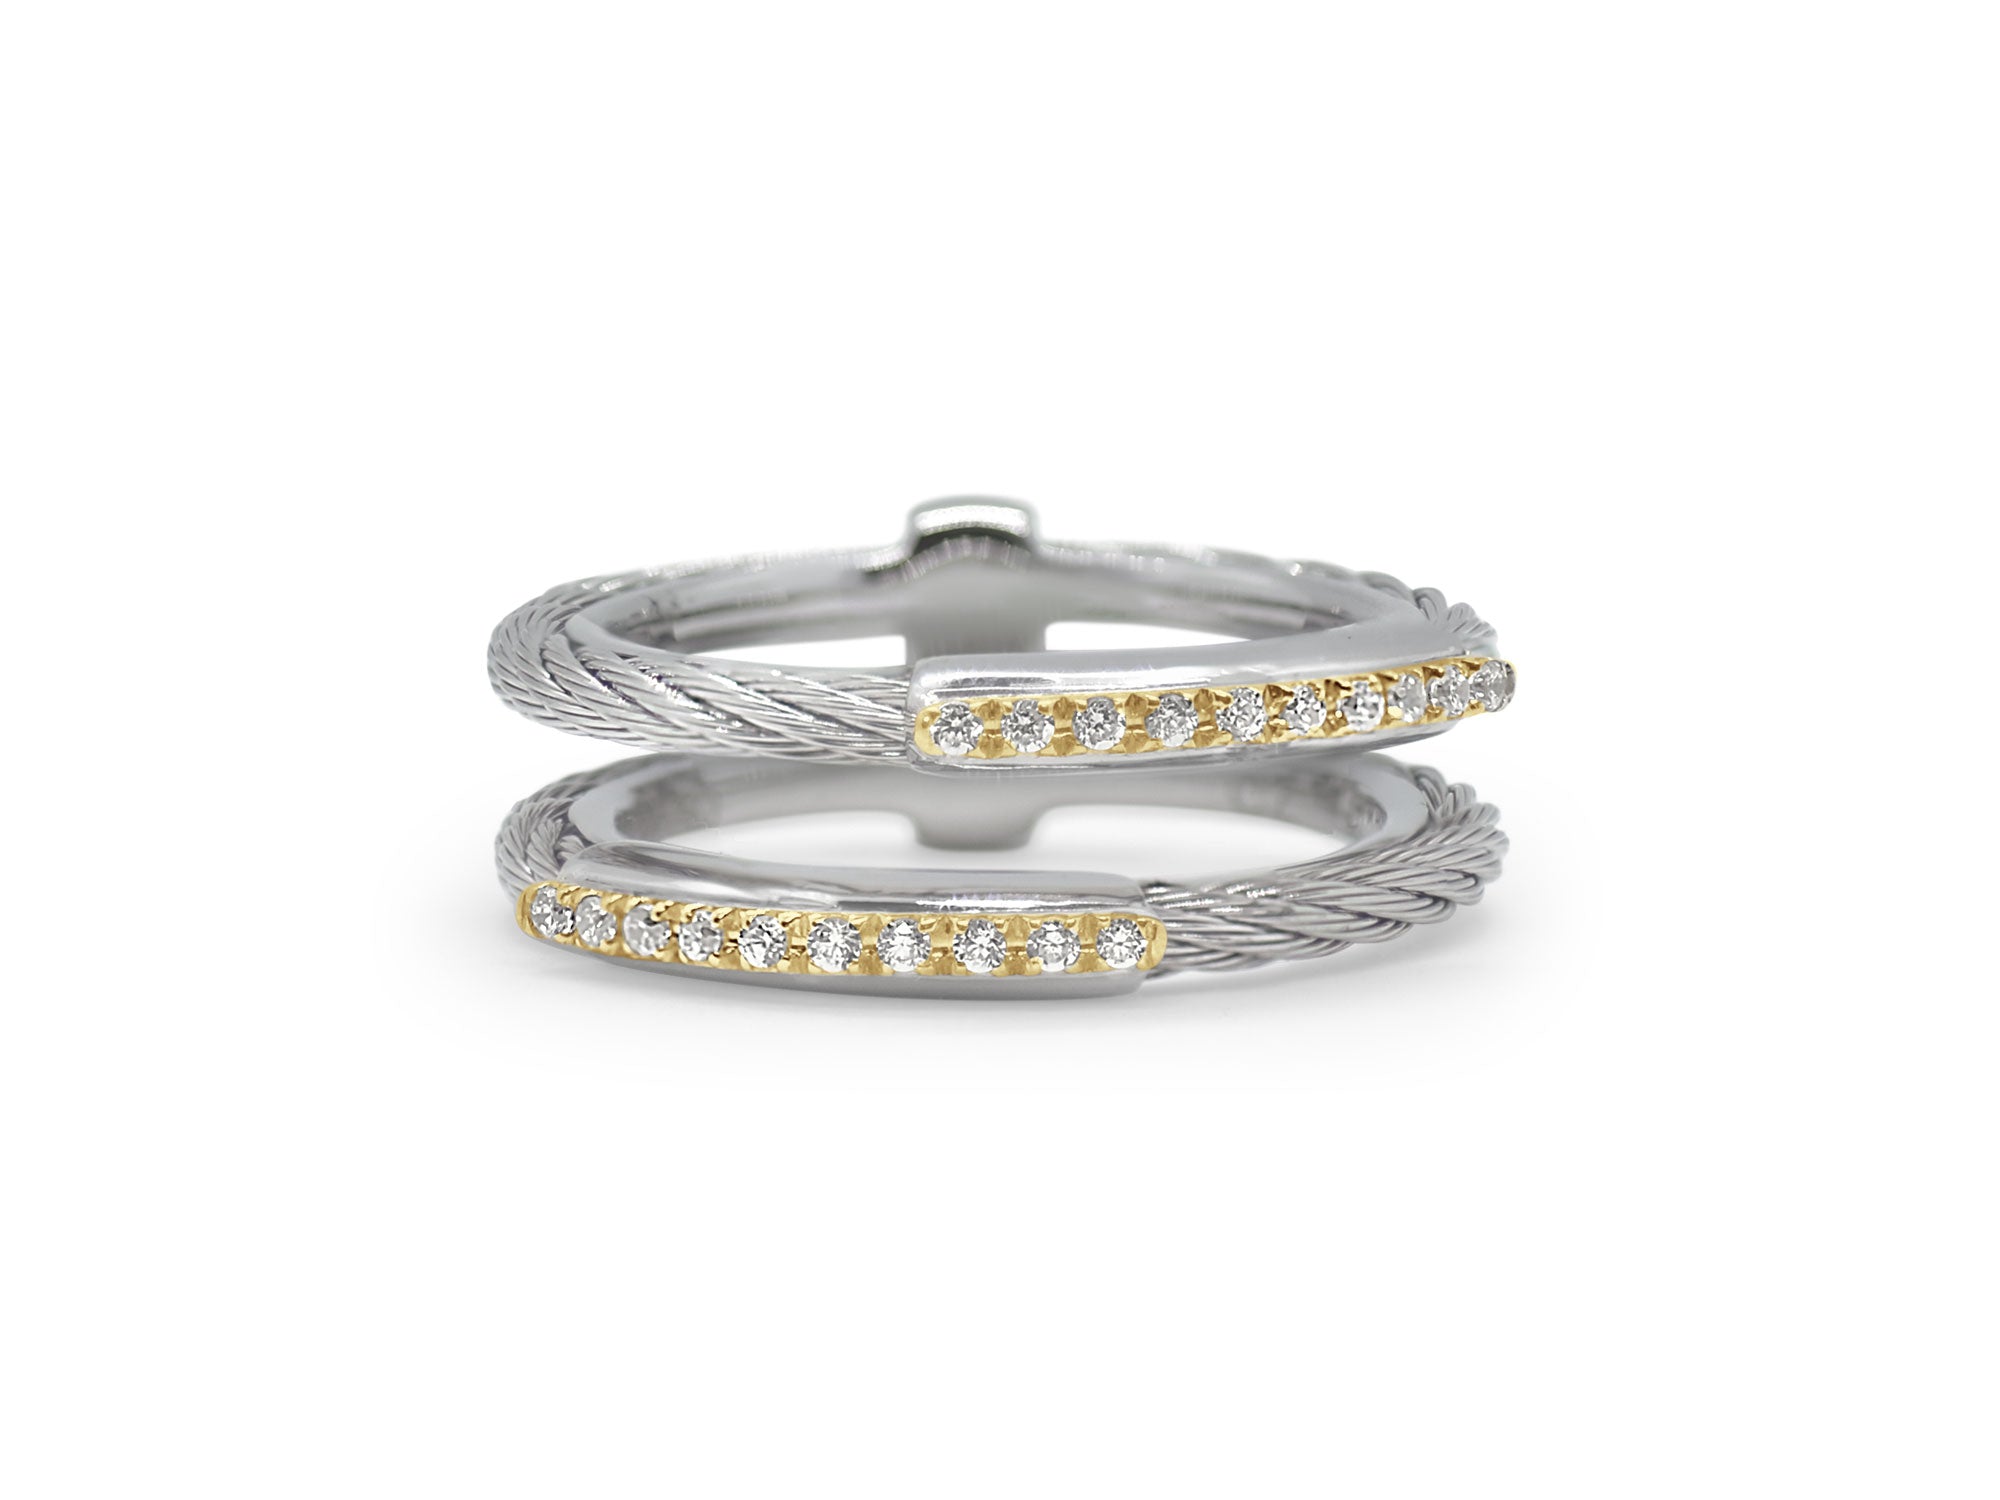 ALOR Grey Cable Petite Channel Bar Ring with 18kt Yellow Gold